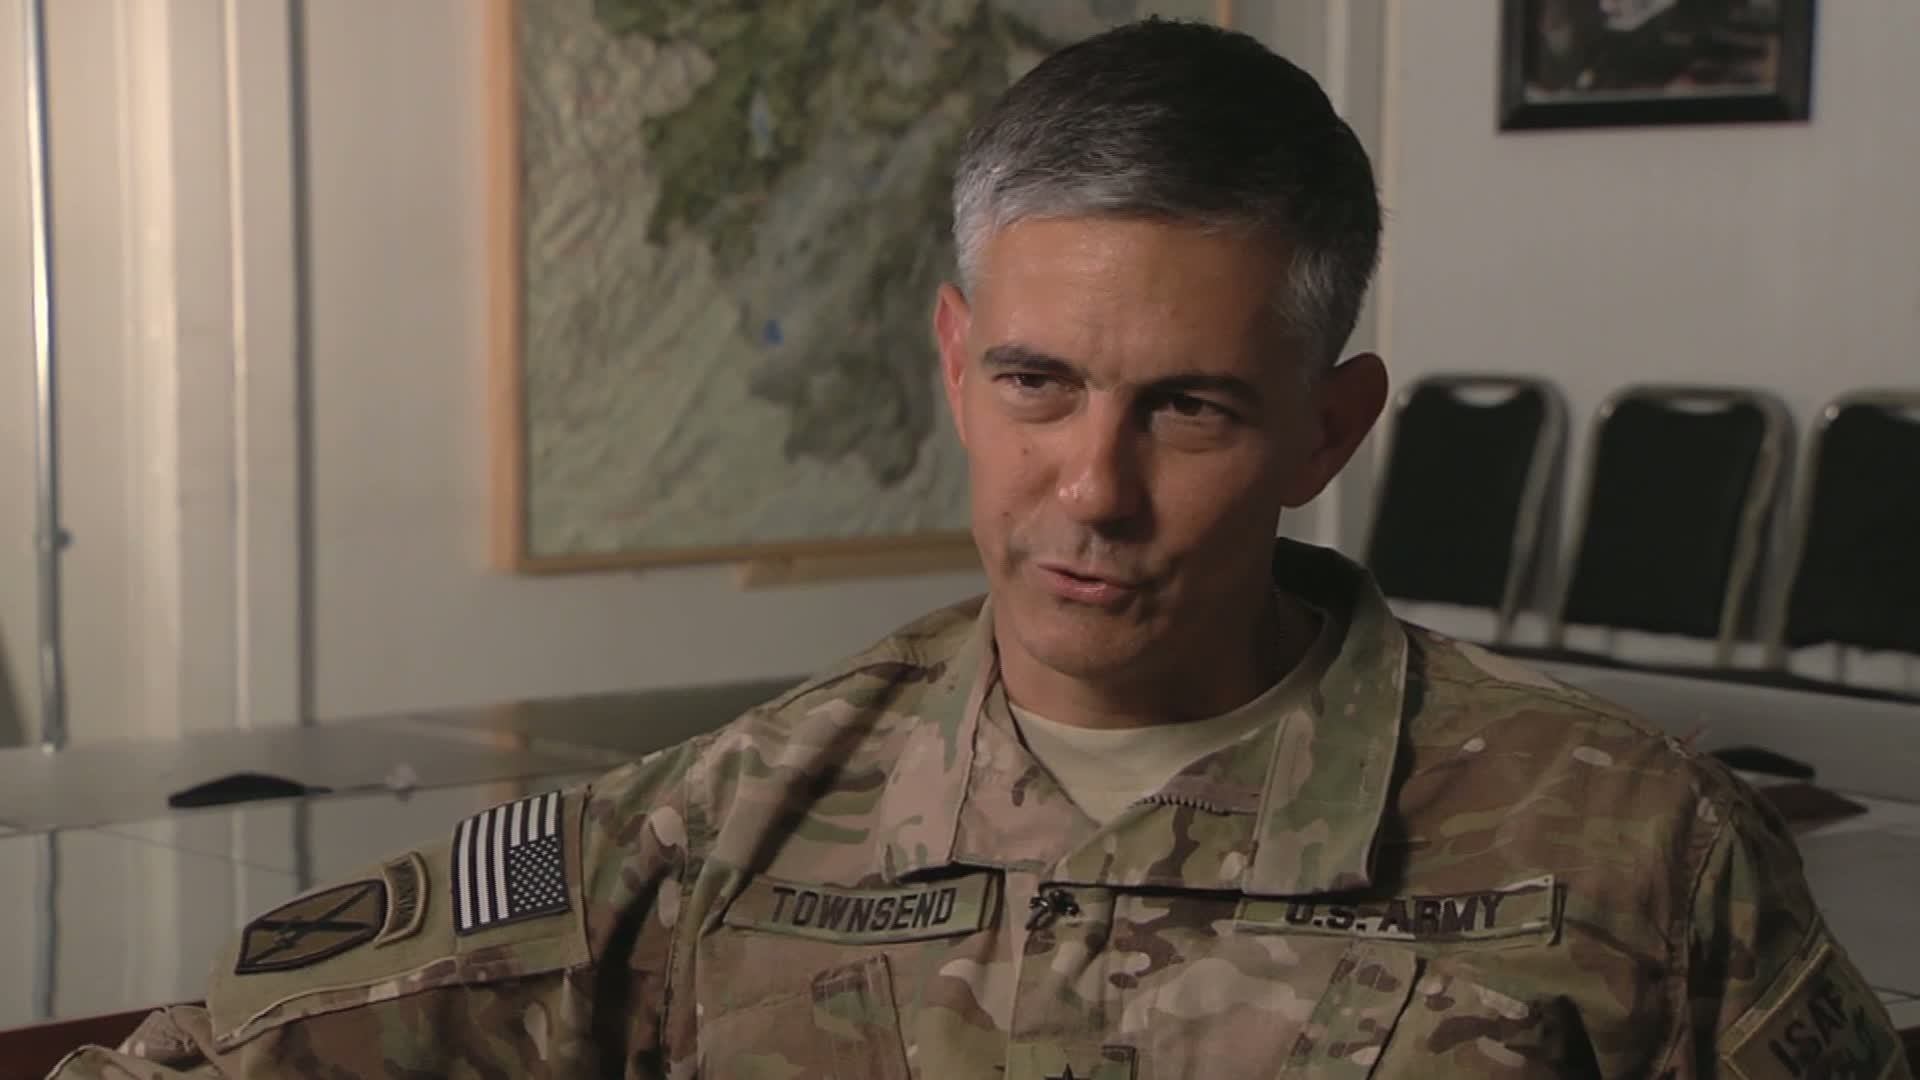 US General Townsend (Video caption courtesy of Defense Video Imagery Distribution System)